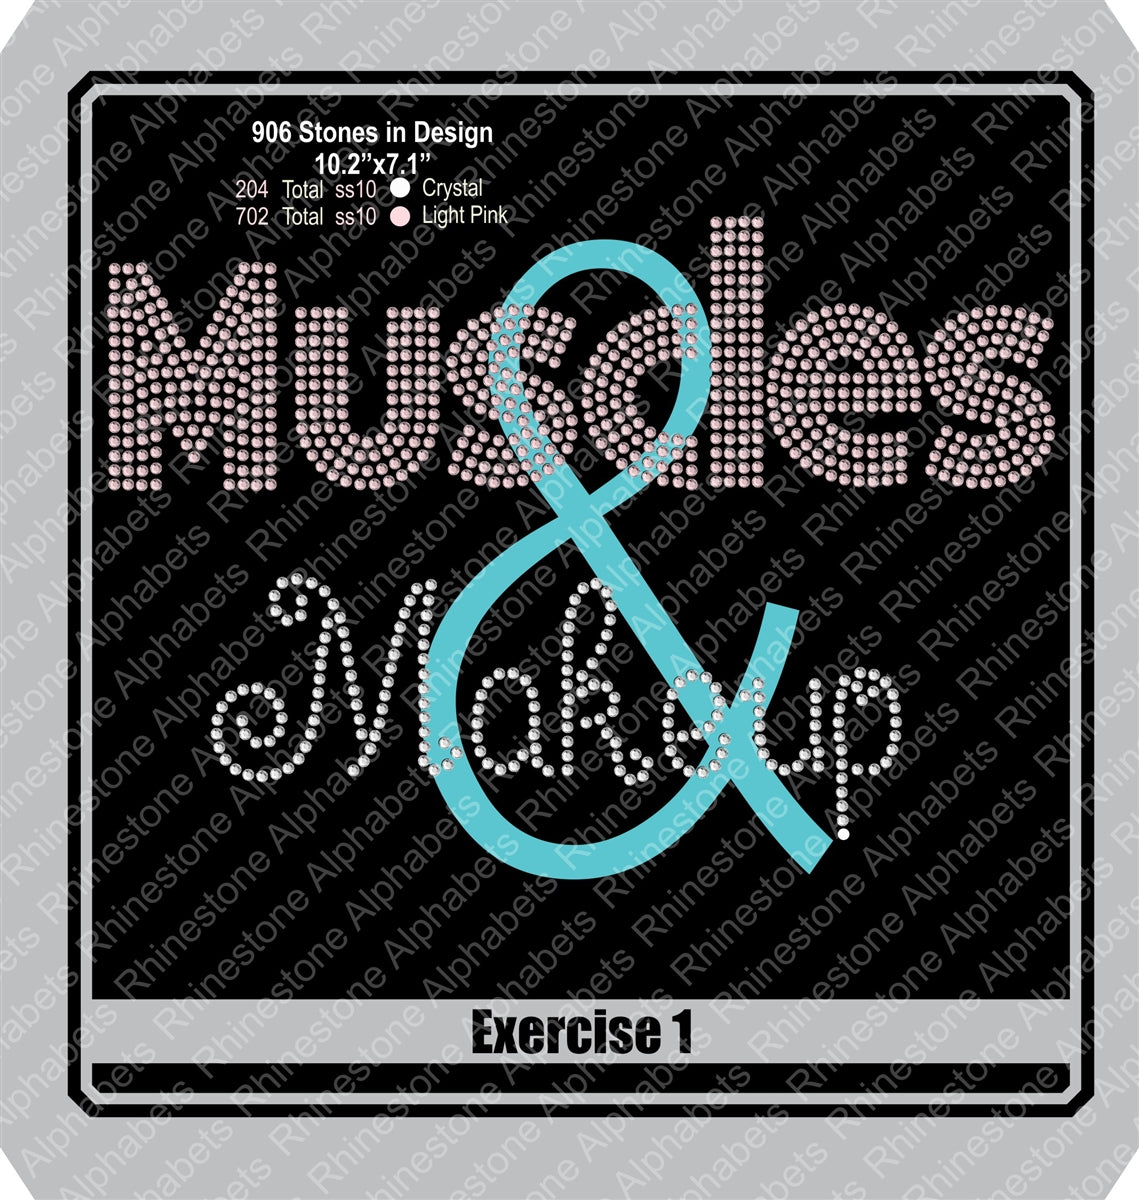 Exercise 1  Muscle and Makeup ,TTF Rhinestone Fonts & Rhinestone Designs